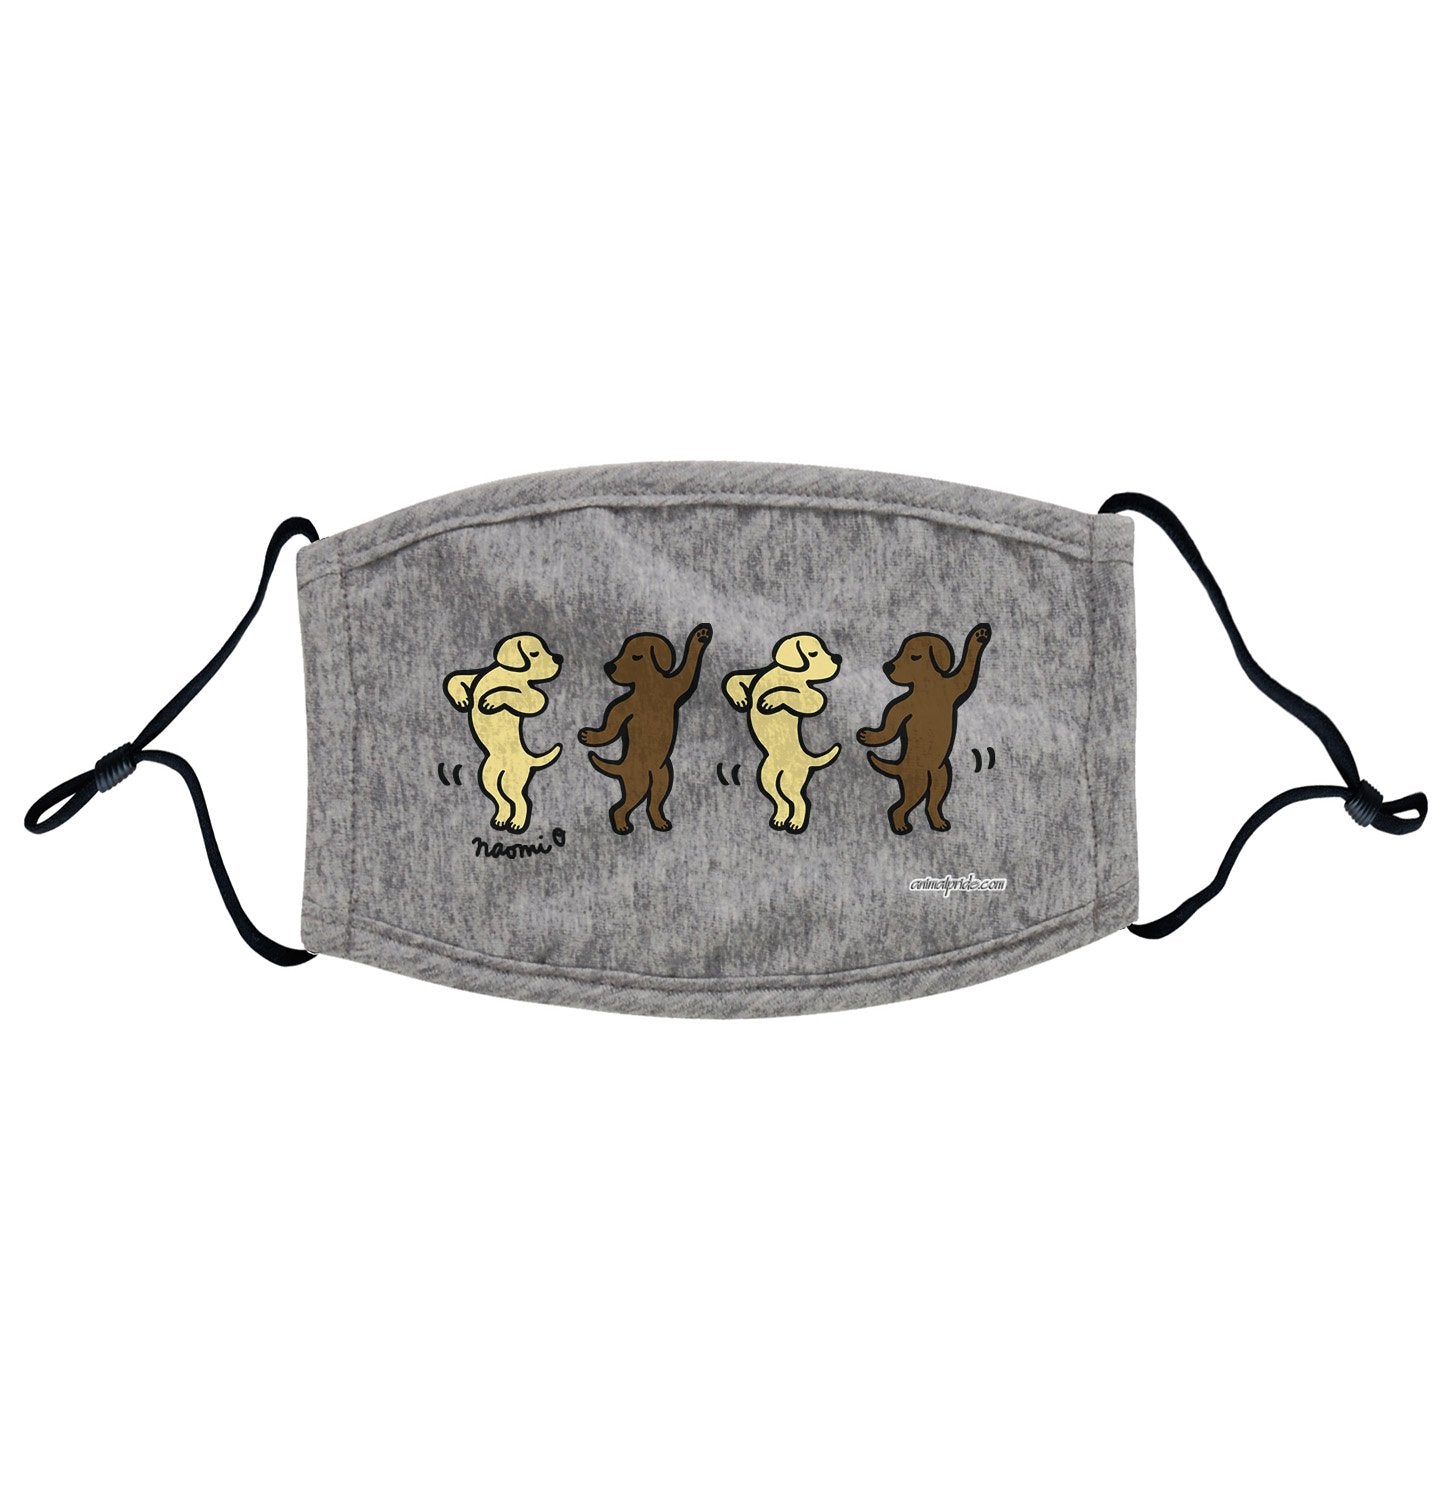 Dancing Yellow and Chocolate Labs - Adjustable Face Mask, Breathable, Reusable, Printed in USA